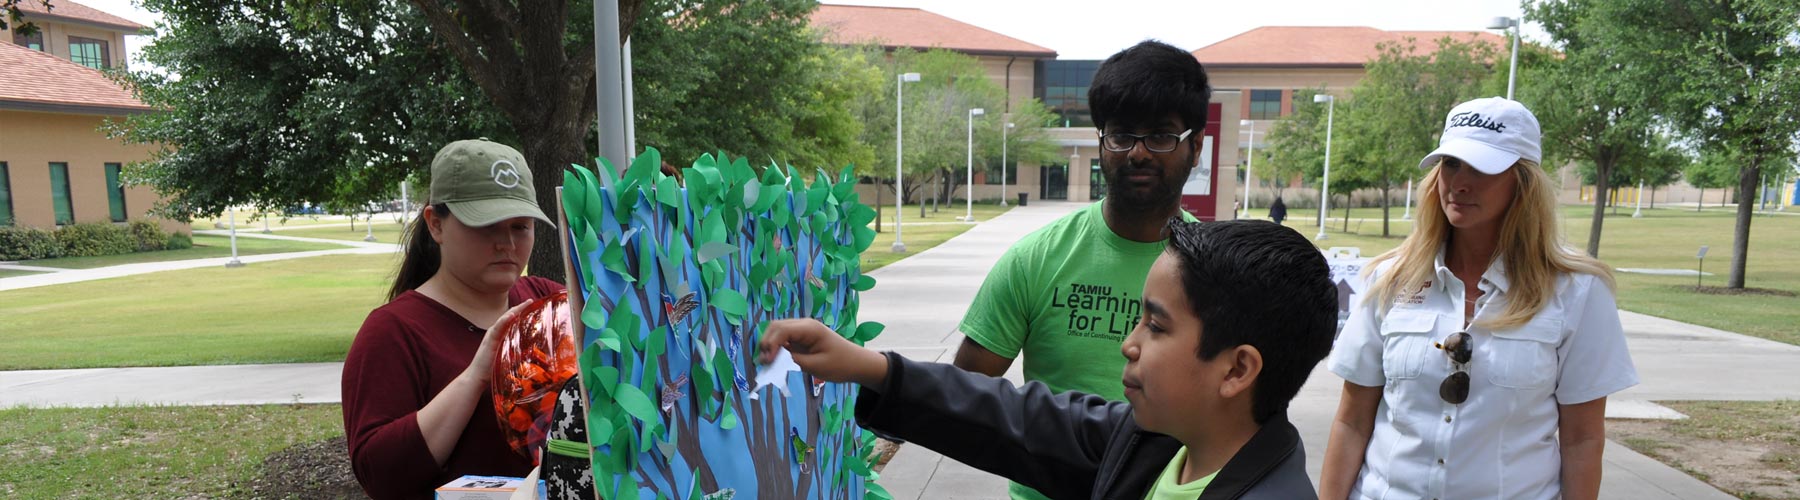 Discover TAMIU 2017 activity, where attendees add paper leaves to a paper tree